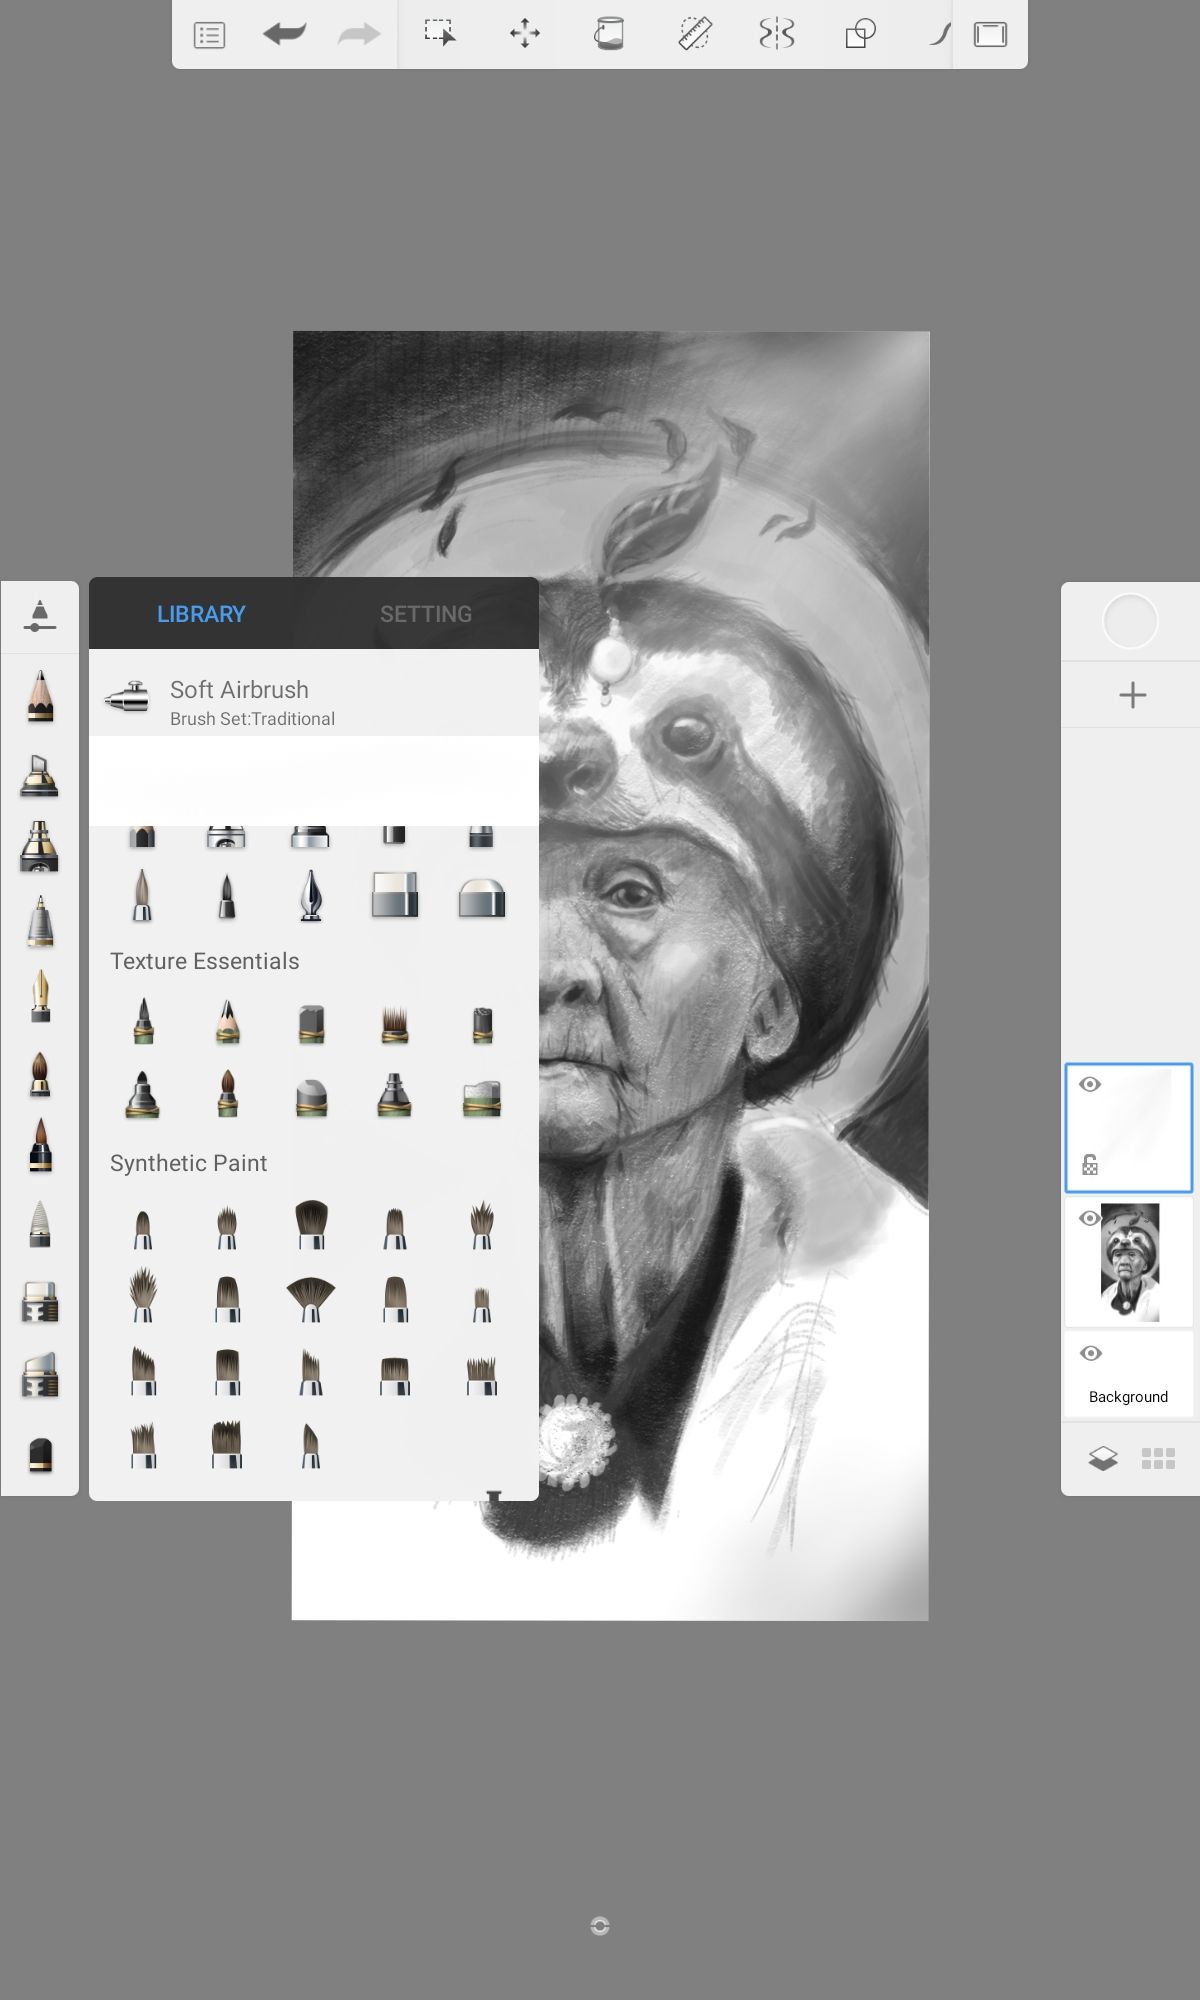 The Sketchbook app on Android has a wide range of brush options in its library